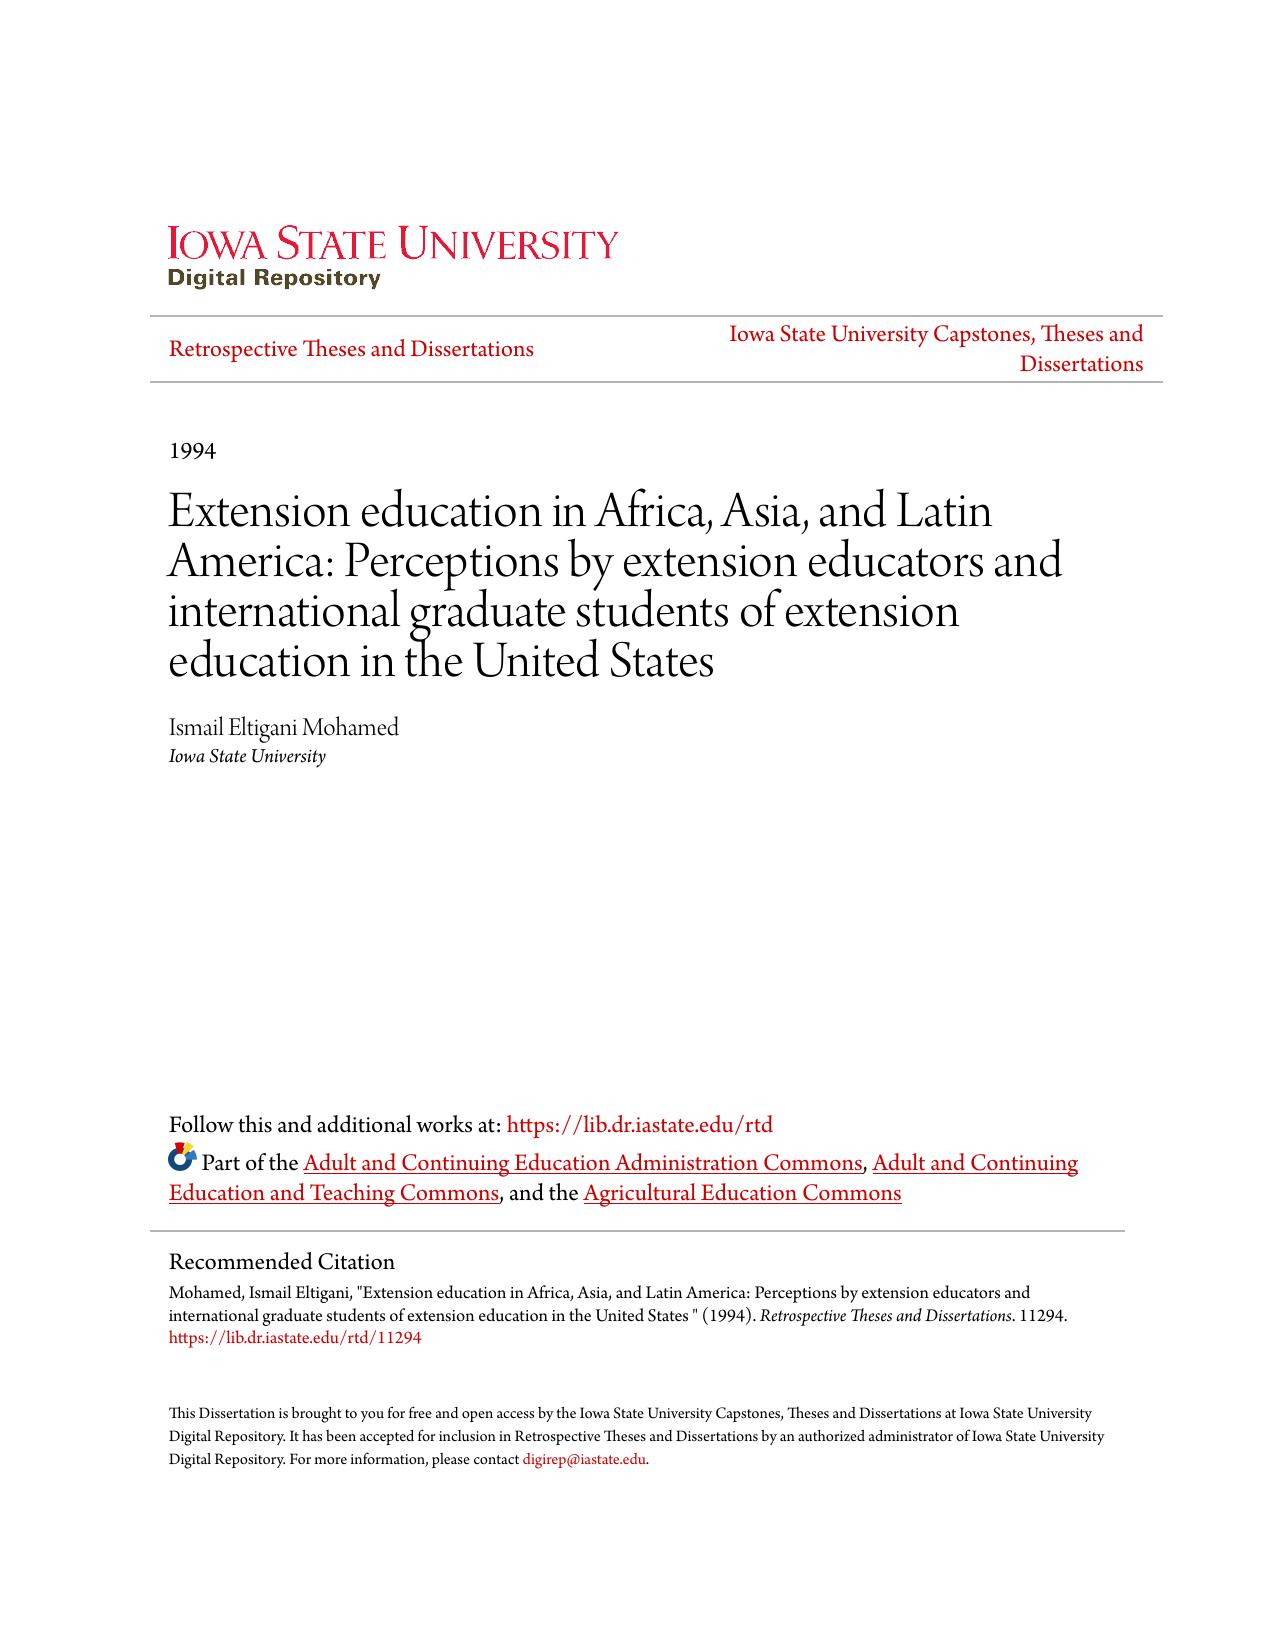 Extension education in Africa, Asia, and Latin America: Perceptions by extension educators and international graduate students of extension education in the United States